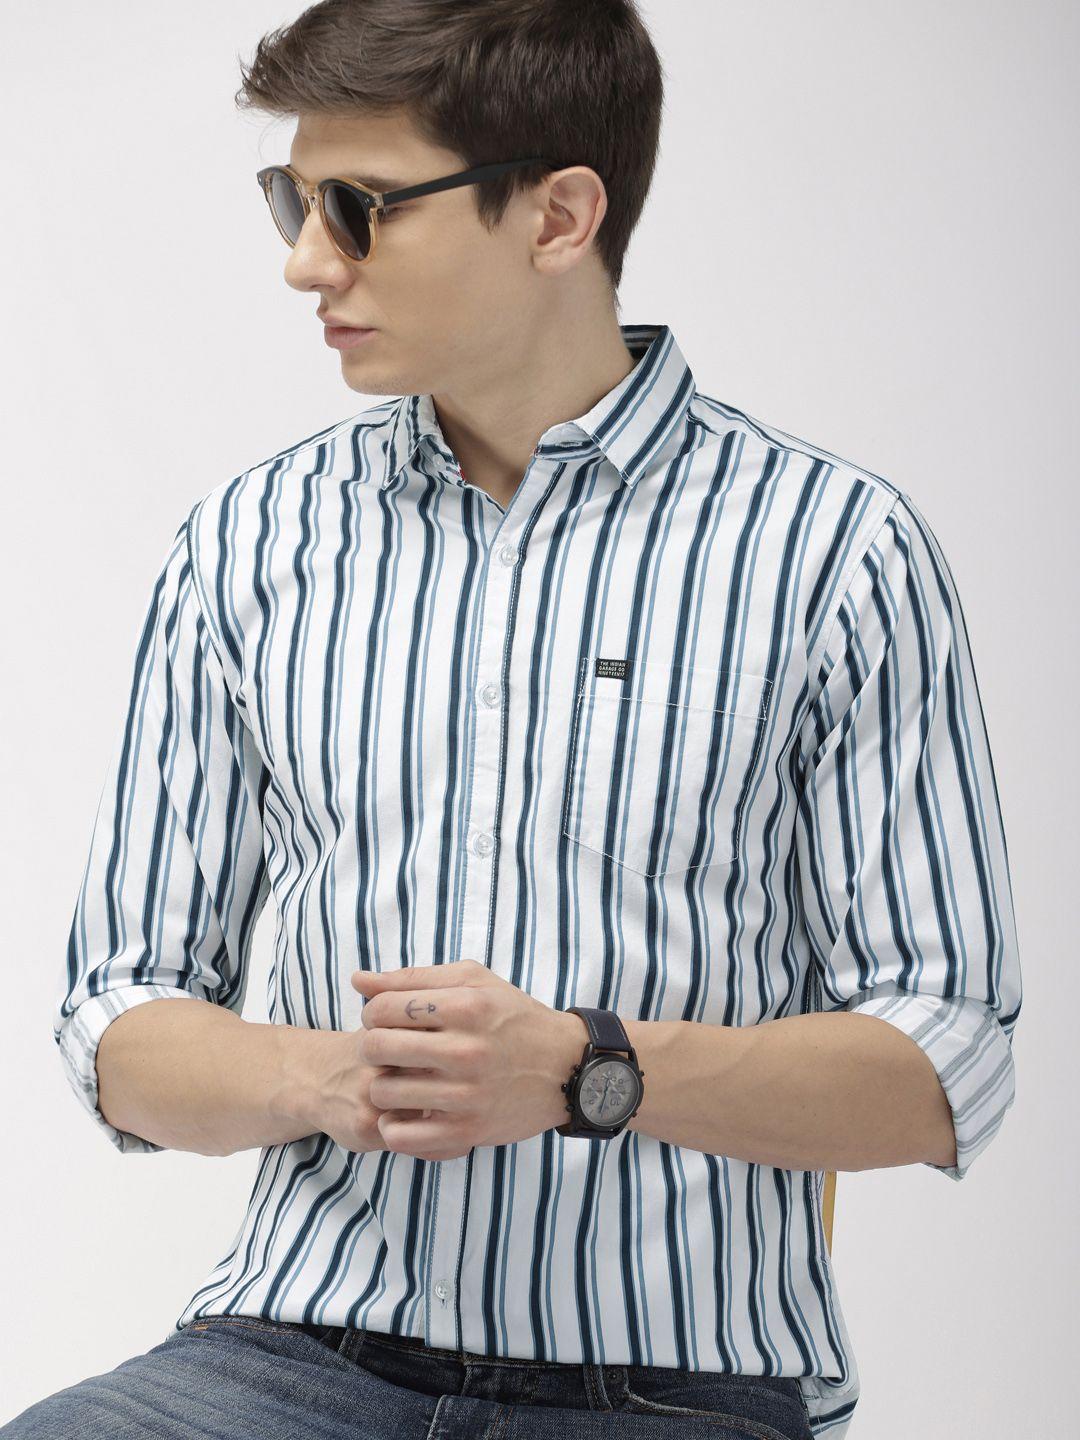 the-indian-garage-co-men-white-&-teal-blue-slim-fit-striped-casual-shirt